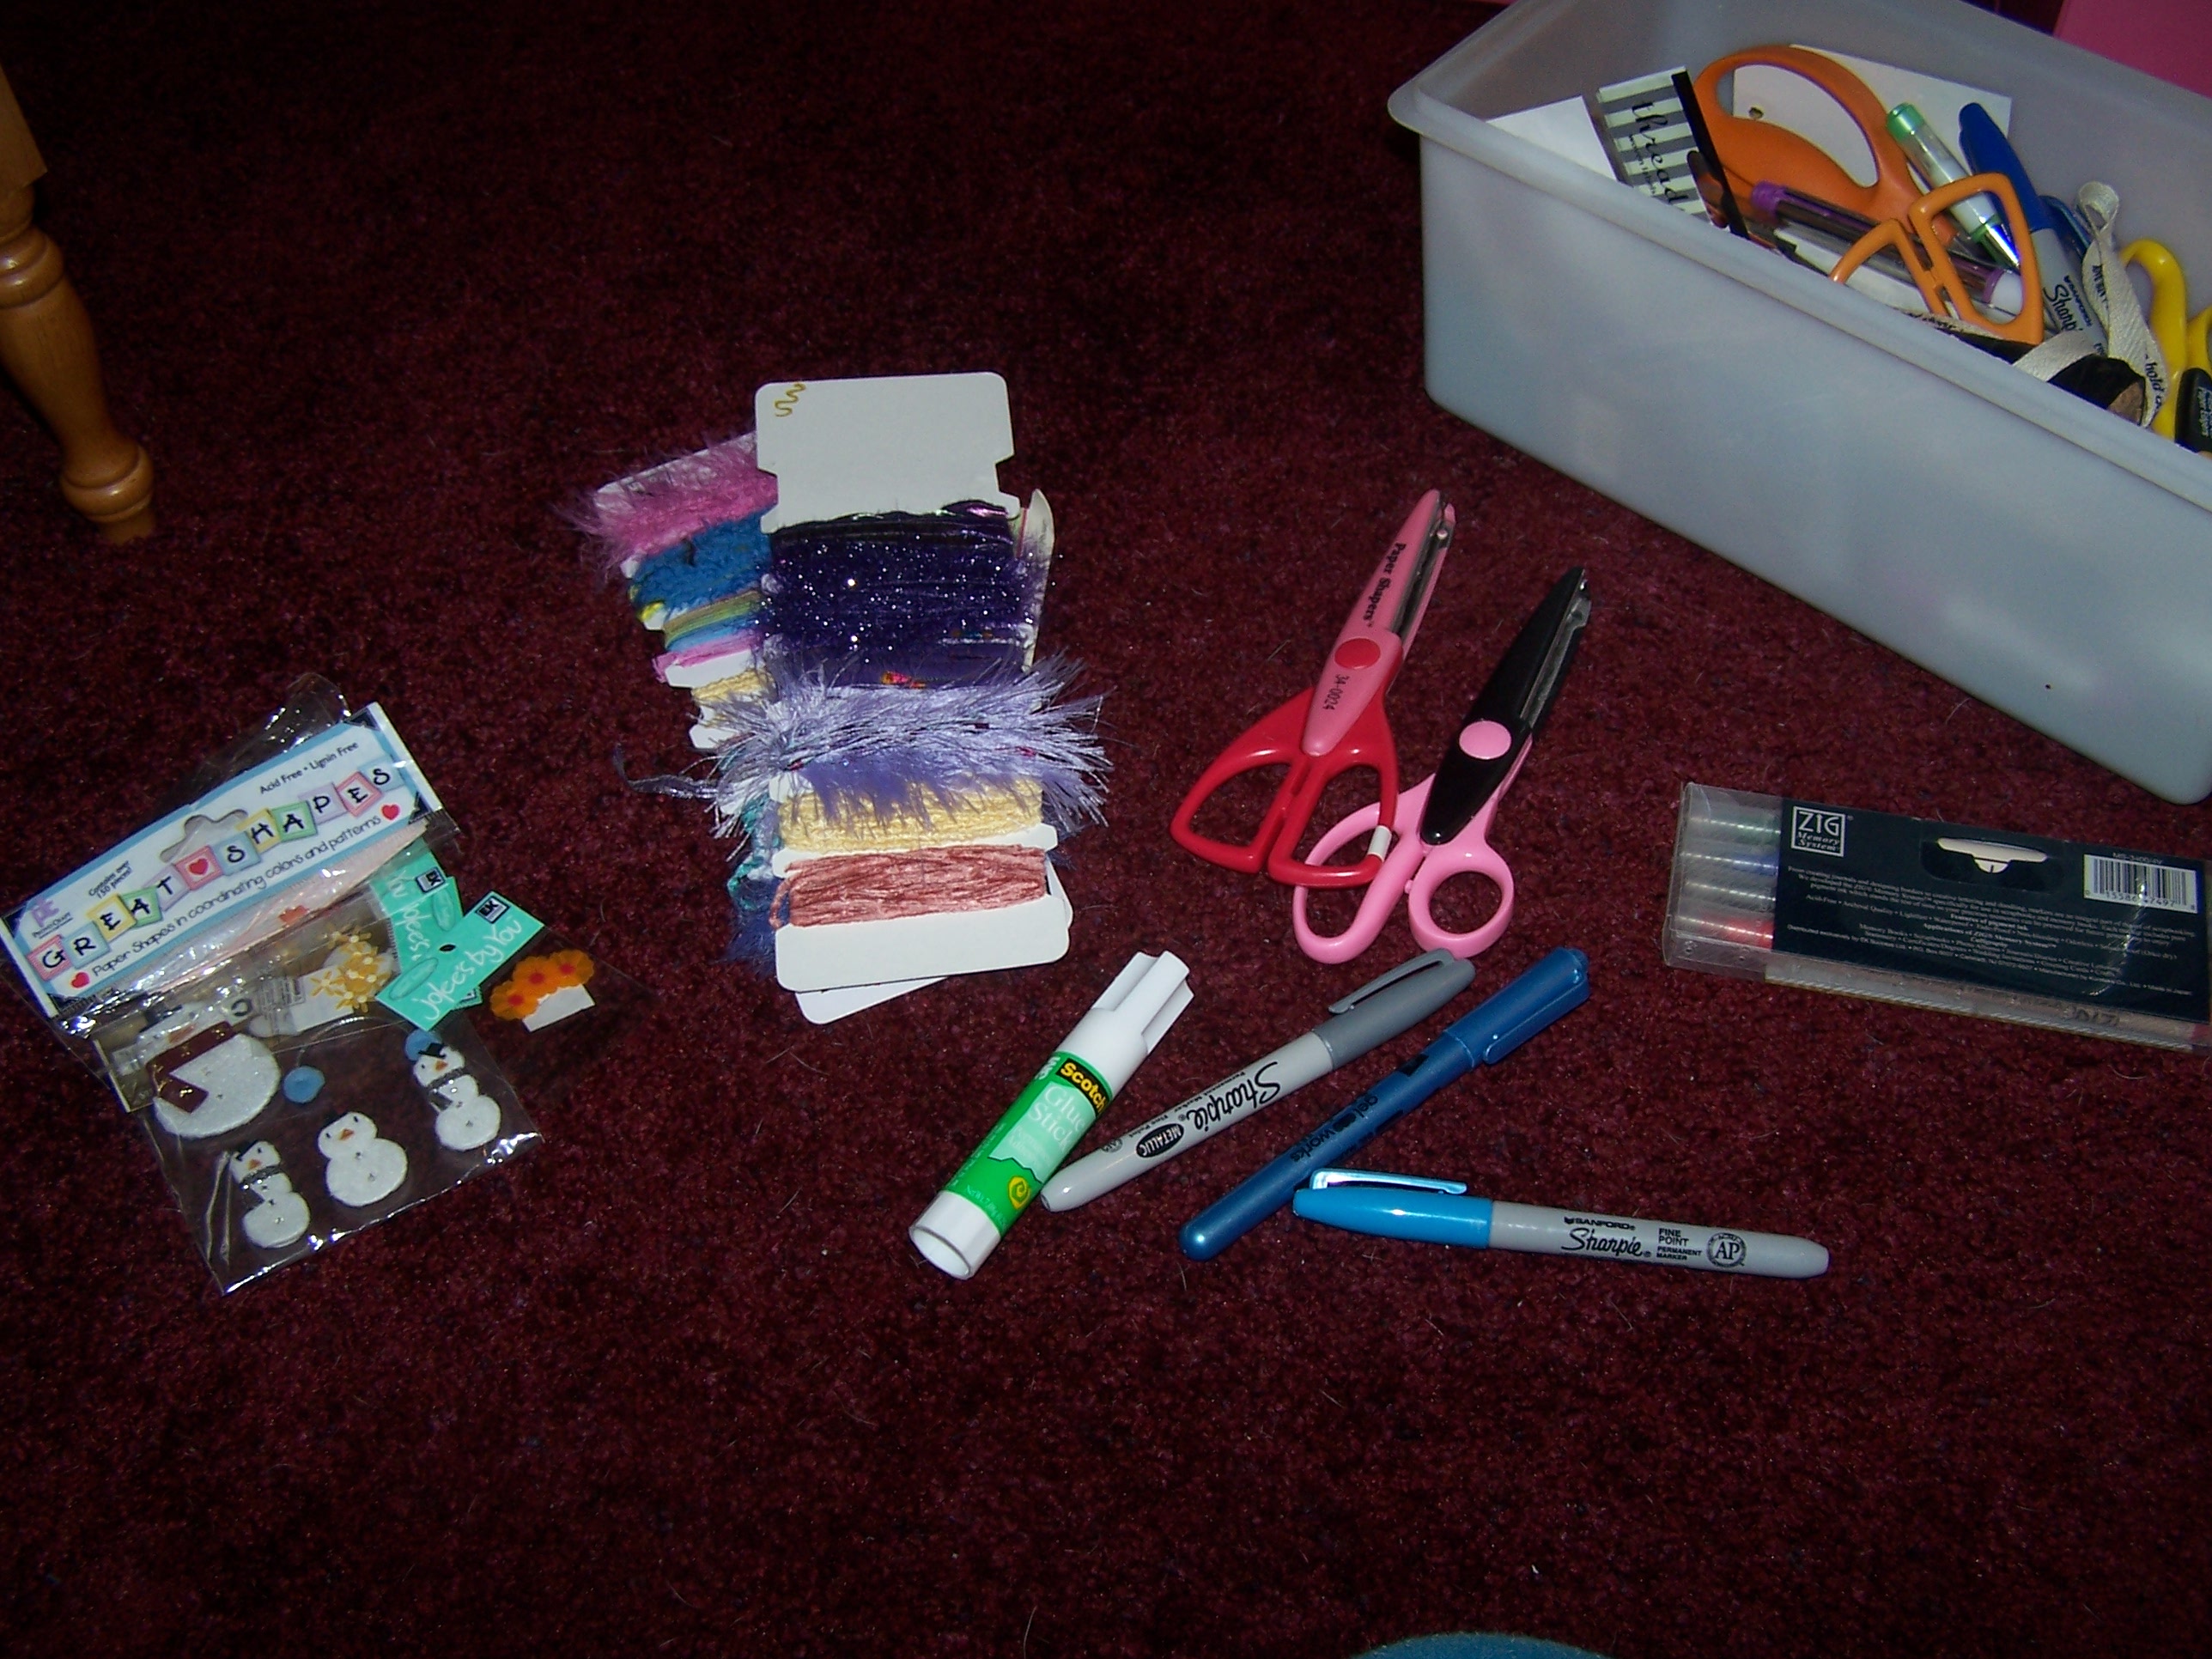 Here is just a glimpse of the plethora of supplies needed for scrapbooking.  Scissors, stickers, markers, pens, accessories, paper...